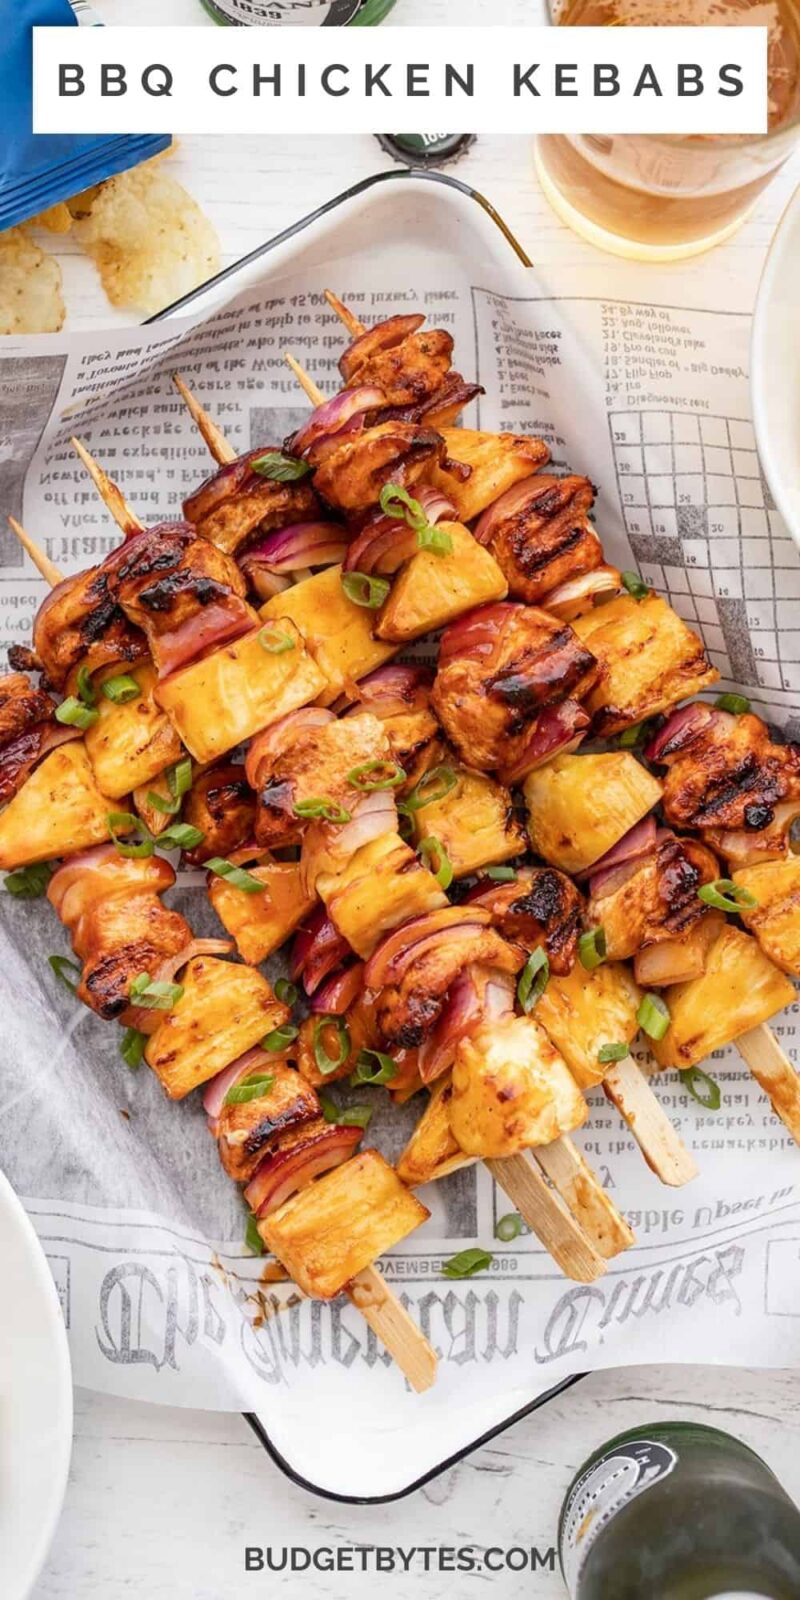 BBQ chicken kebabs on a tray lined with paper.